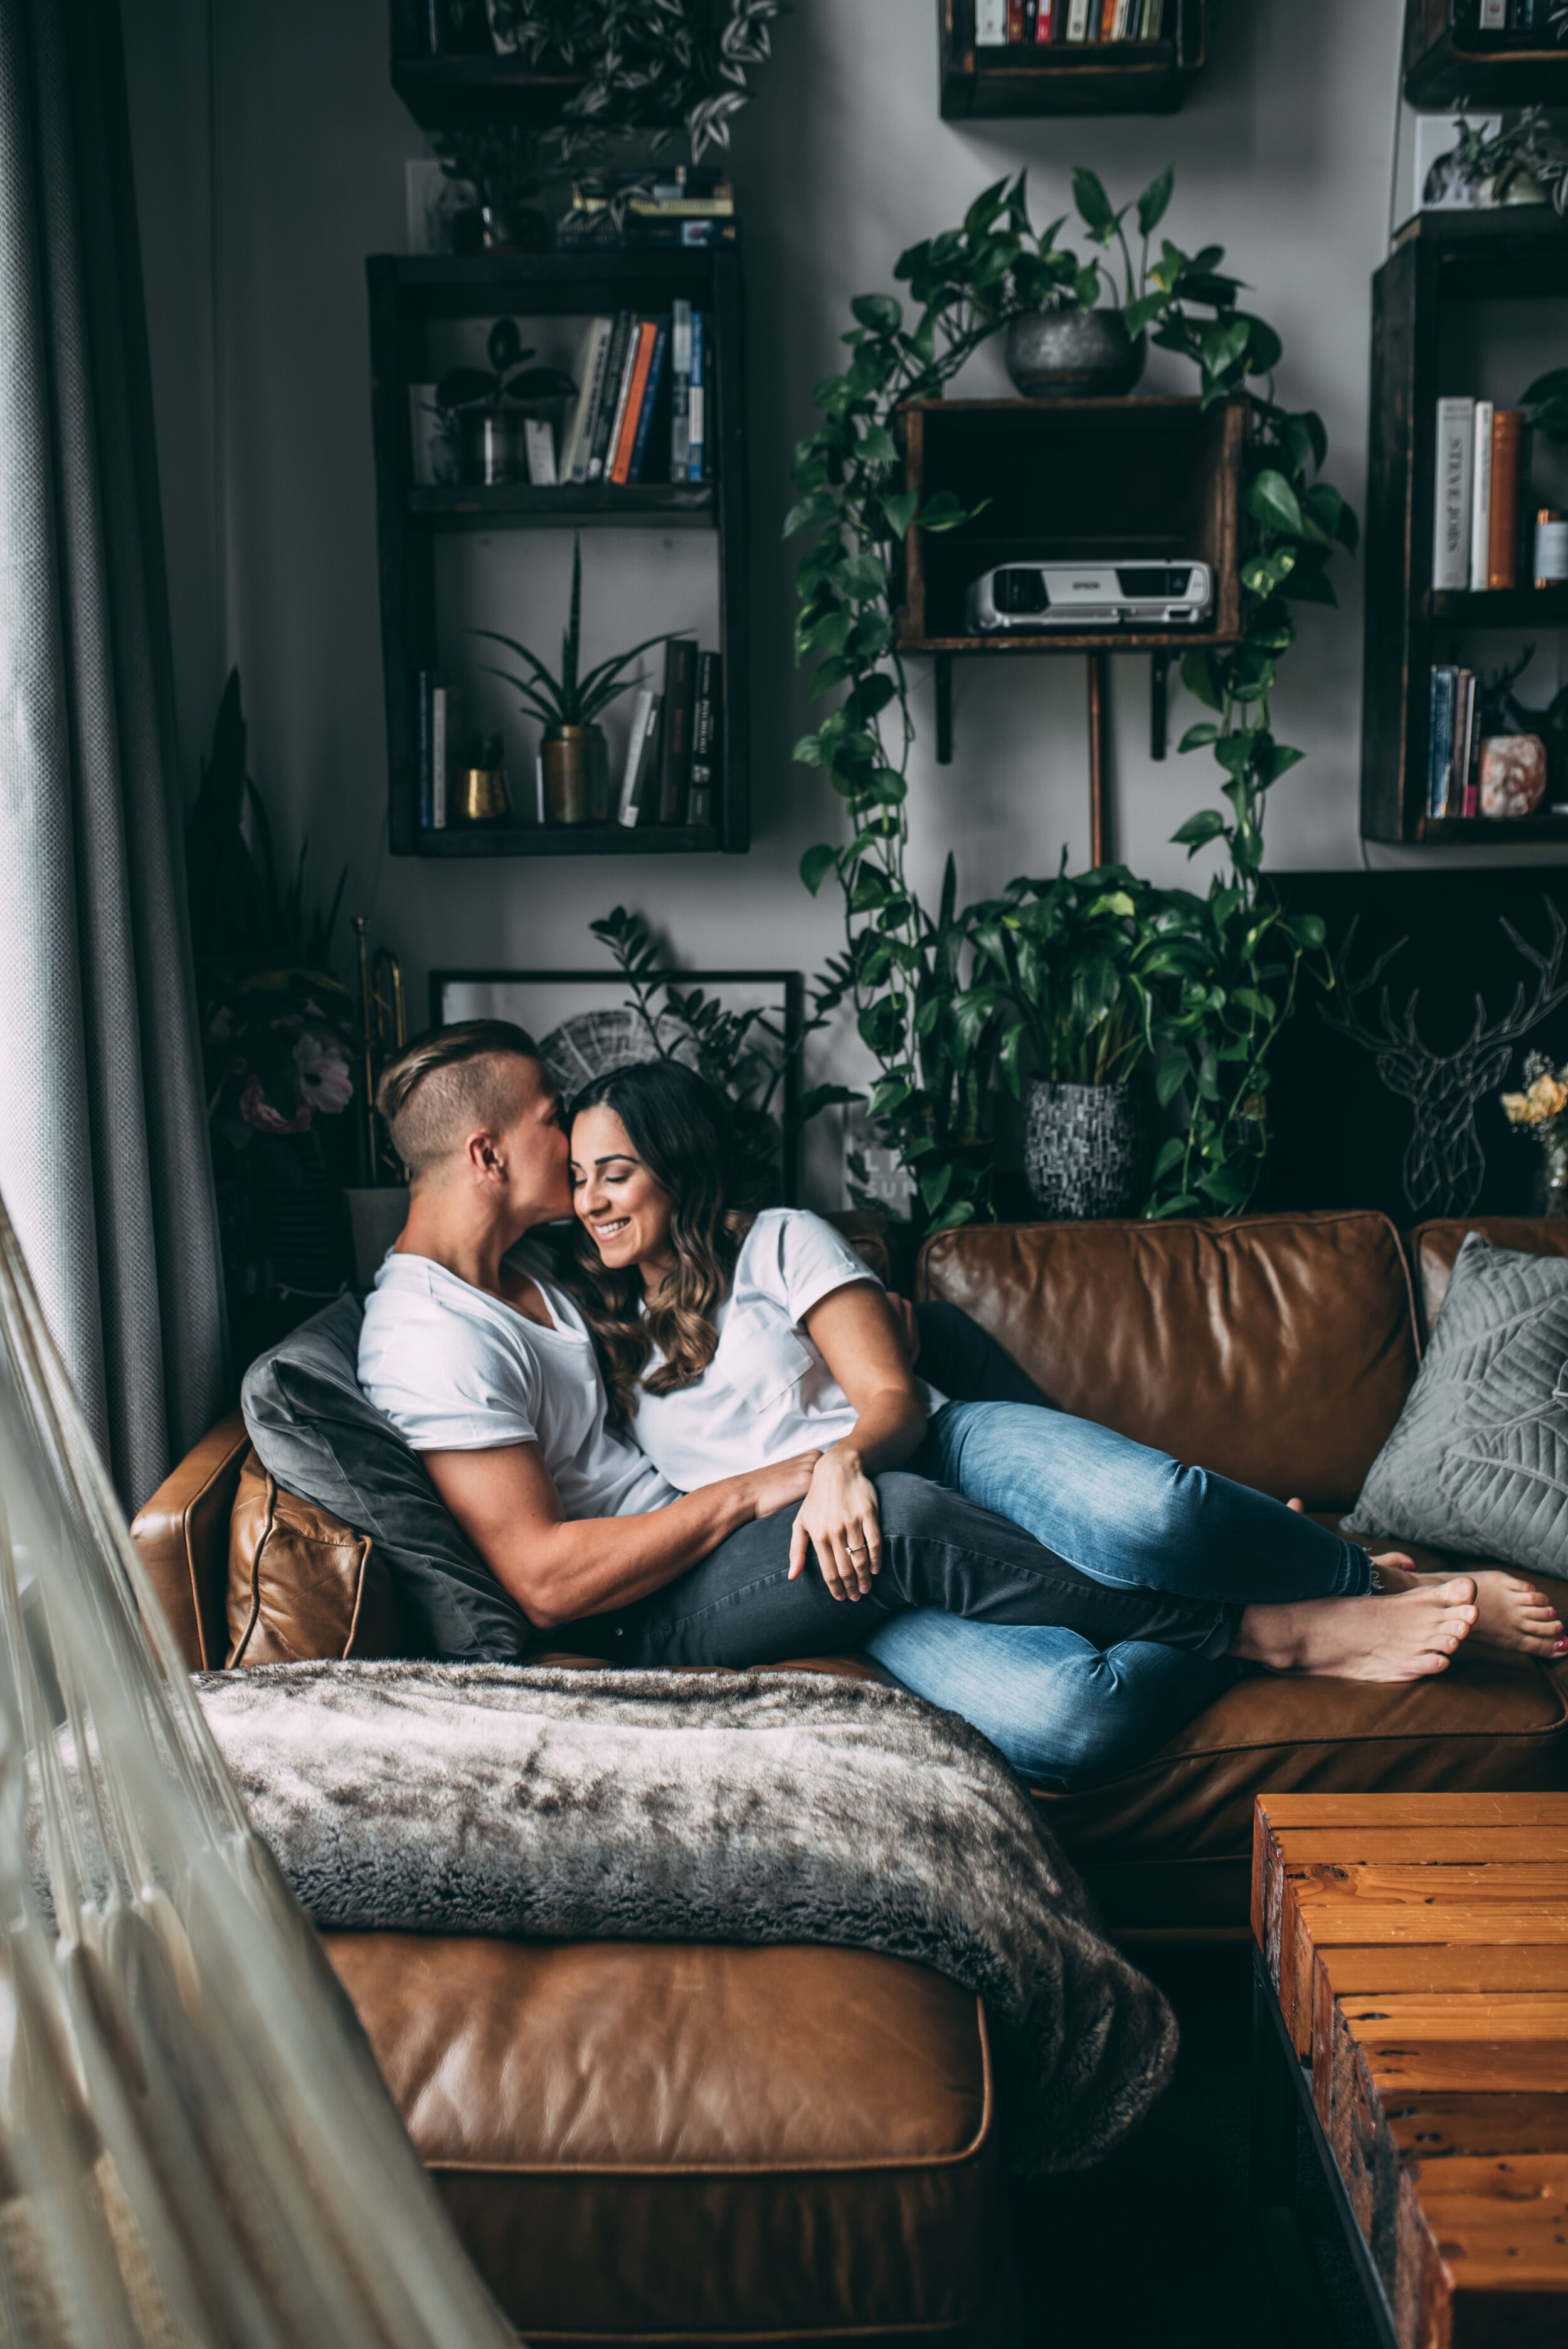 Vancouver Engagement Session - In Home Couples Session - Loft Garden Oasis - Laura Olson Photography - Sunshine Coast BC & Vancouver Wedding & Elopement Photographer7450.jpg